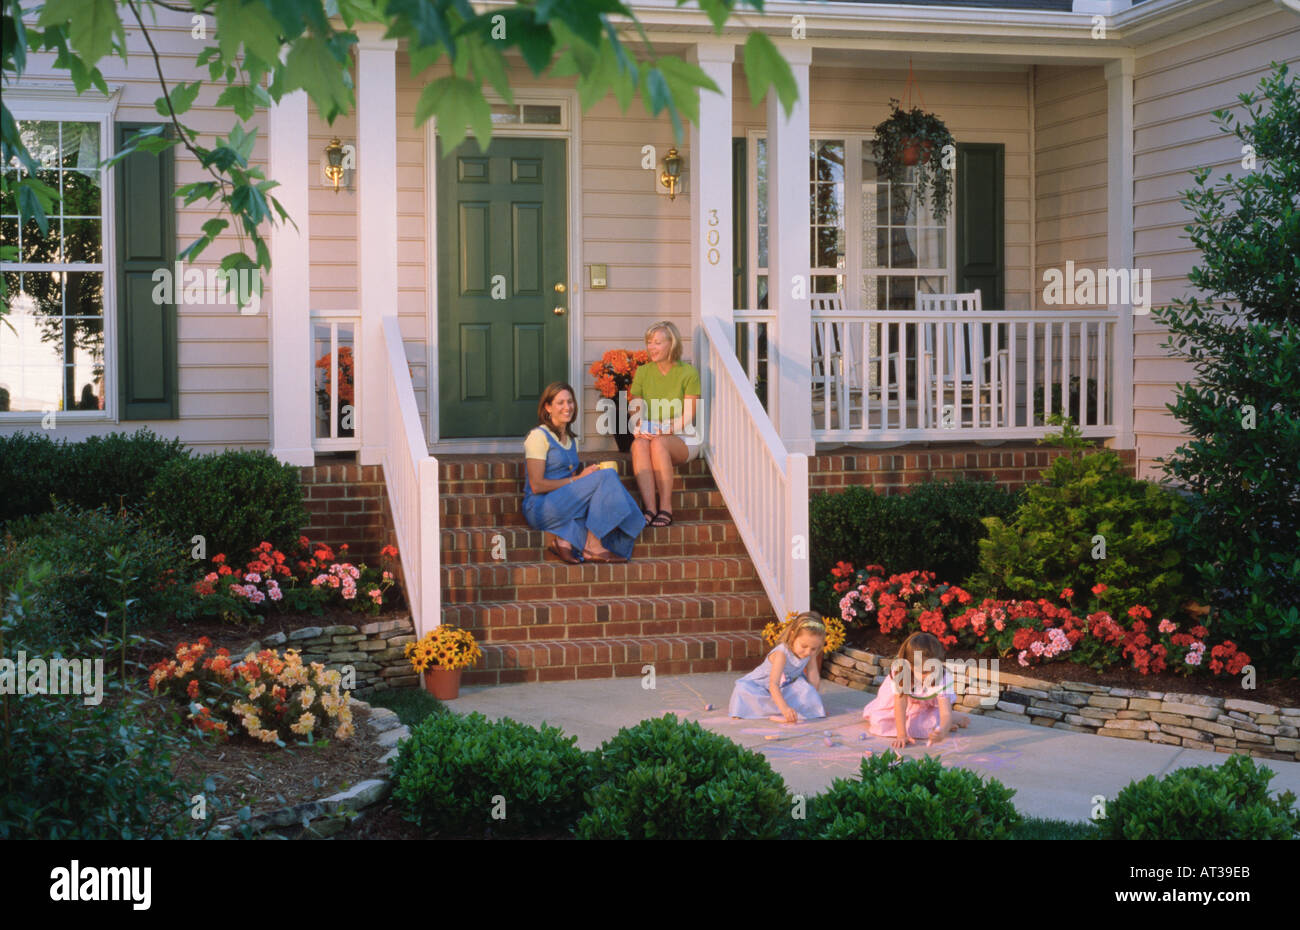 Two mothers visit on the steps of a front porch while their children play in a suburban neighborhood Stock Photo